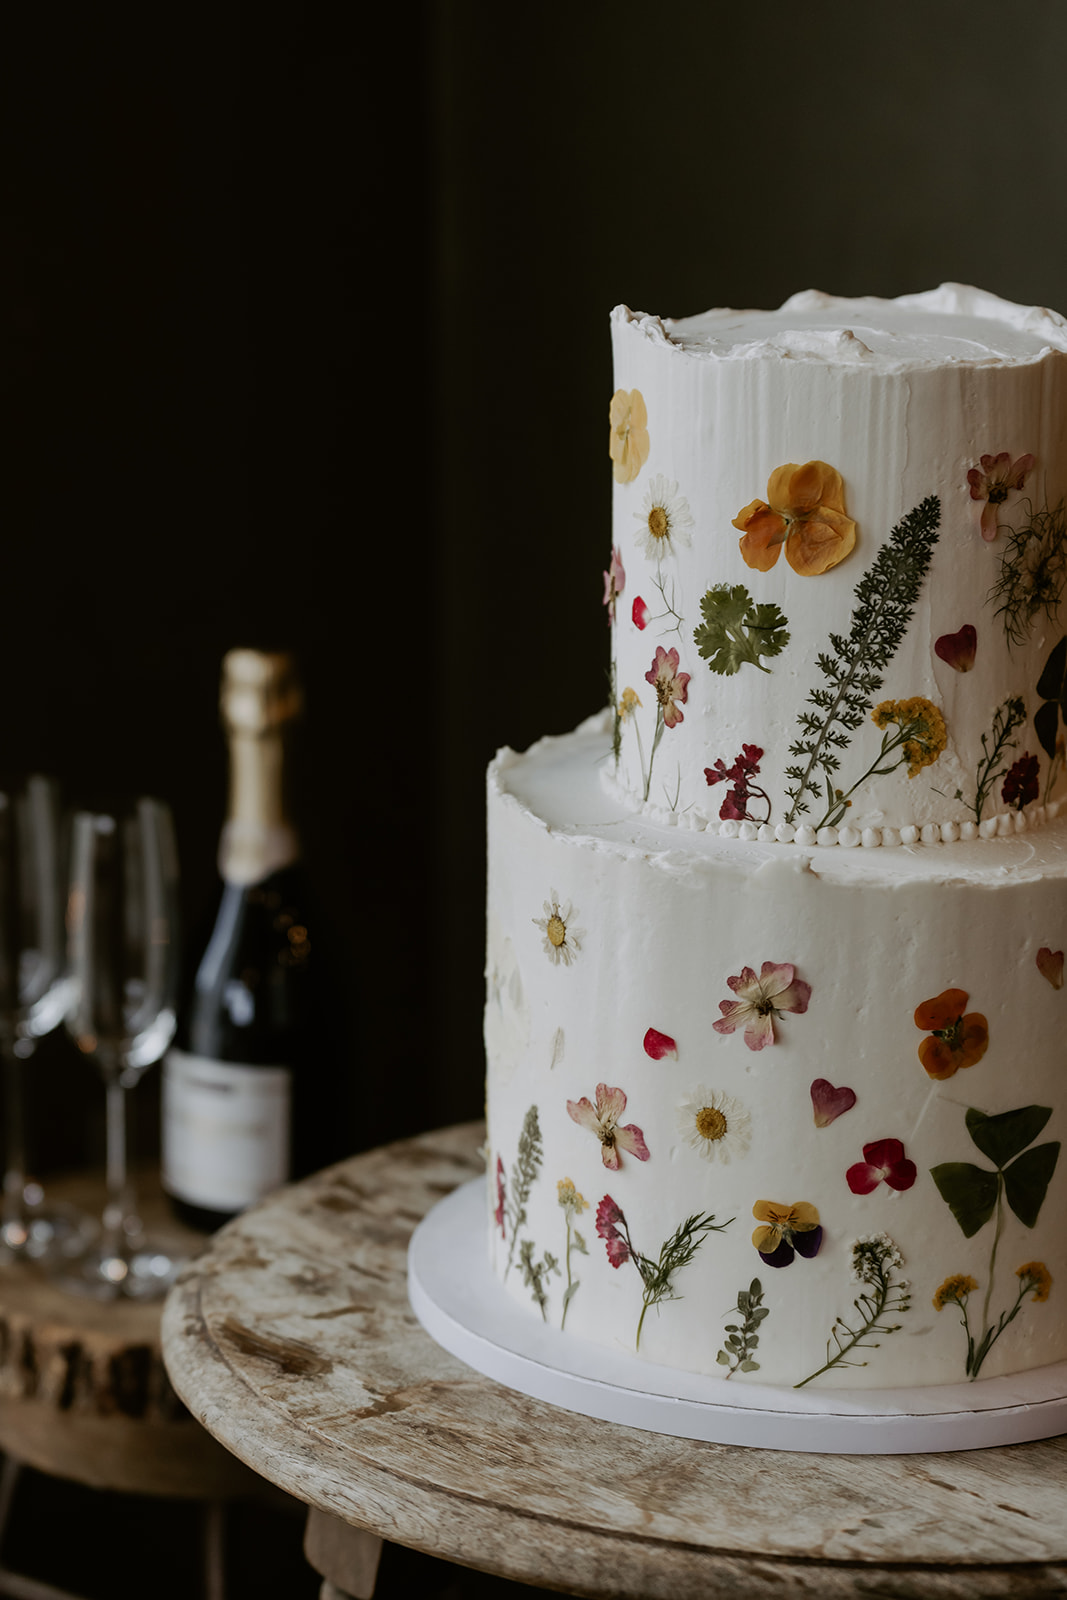 A tiered white cake adorned with edible flowers, displayed on a rustic table next to champagne flutes and a bottle.